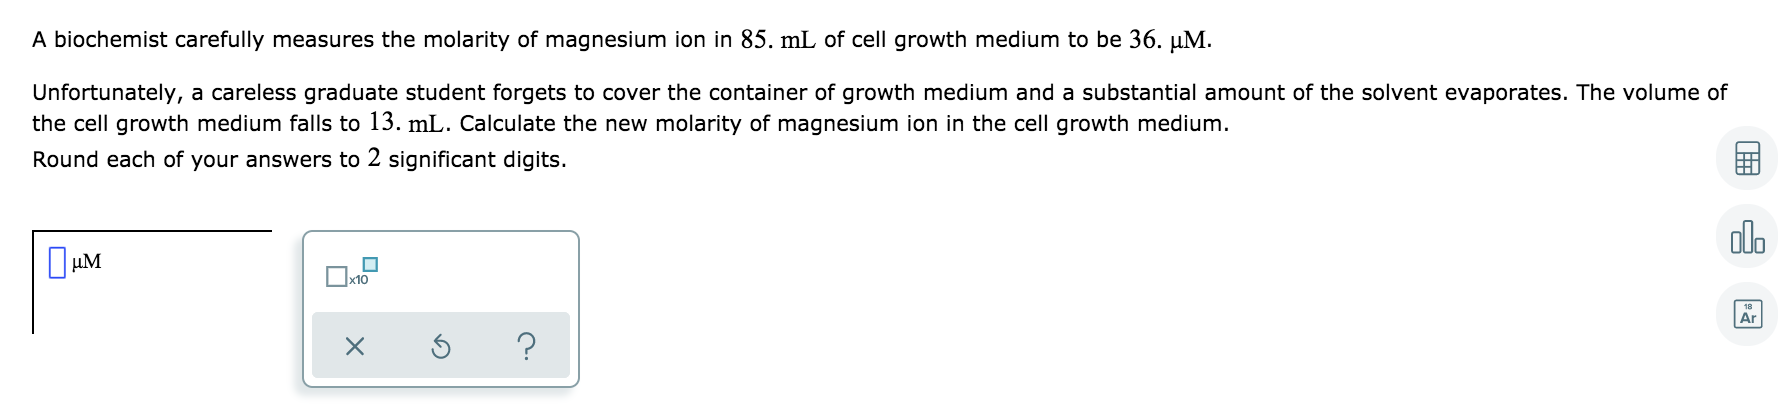 A biochemist carefully measures the molarity of magnesium ion in 85. mL of cell growth medium to be 36. µM.
Unfortunately, a careless graduate student forgets to cover the container of growth medium and a substantial amount of the solvent evaporates. The volume of
the cell growth medium falls to 13. mL. Calculate the new molarity of magnesium ion in the cell growth medium.
Round each of your answers to 2 significant digits.
do
µM
Ar
?
